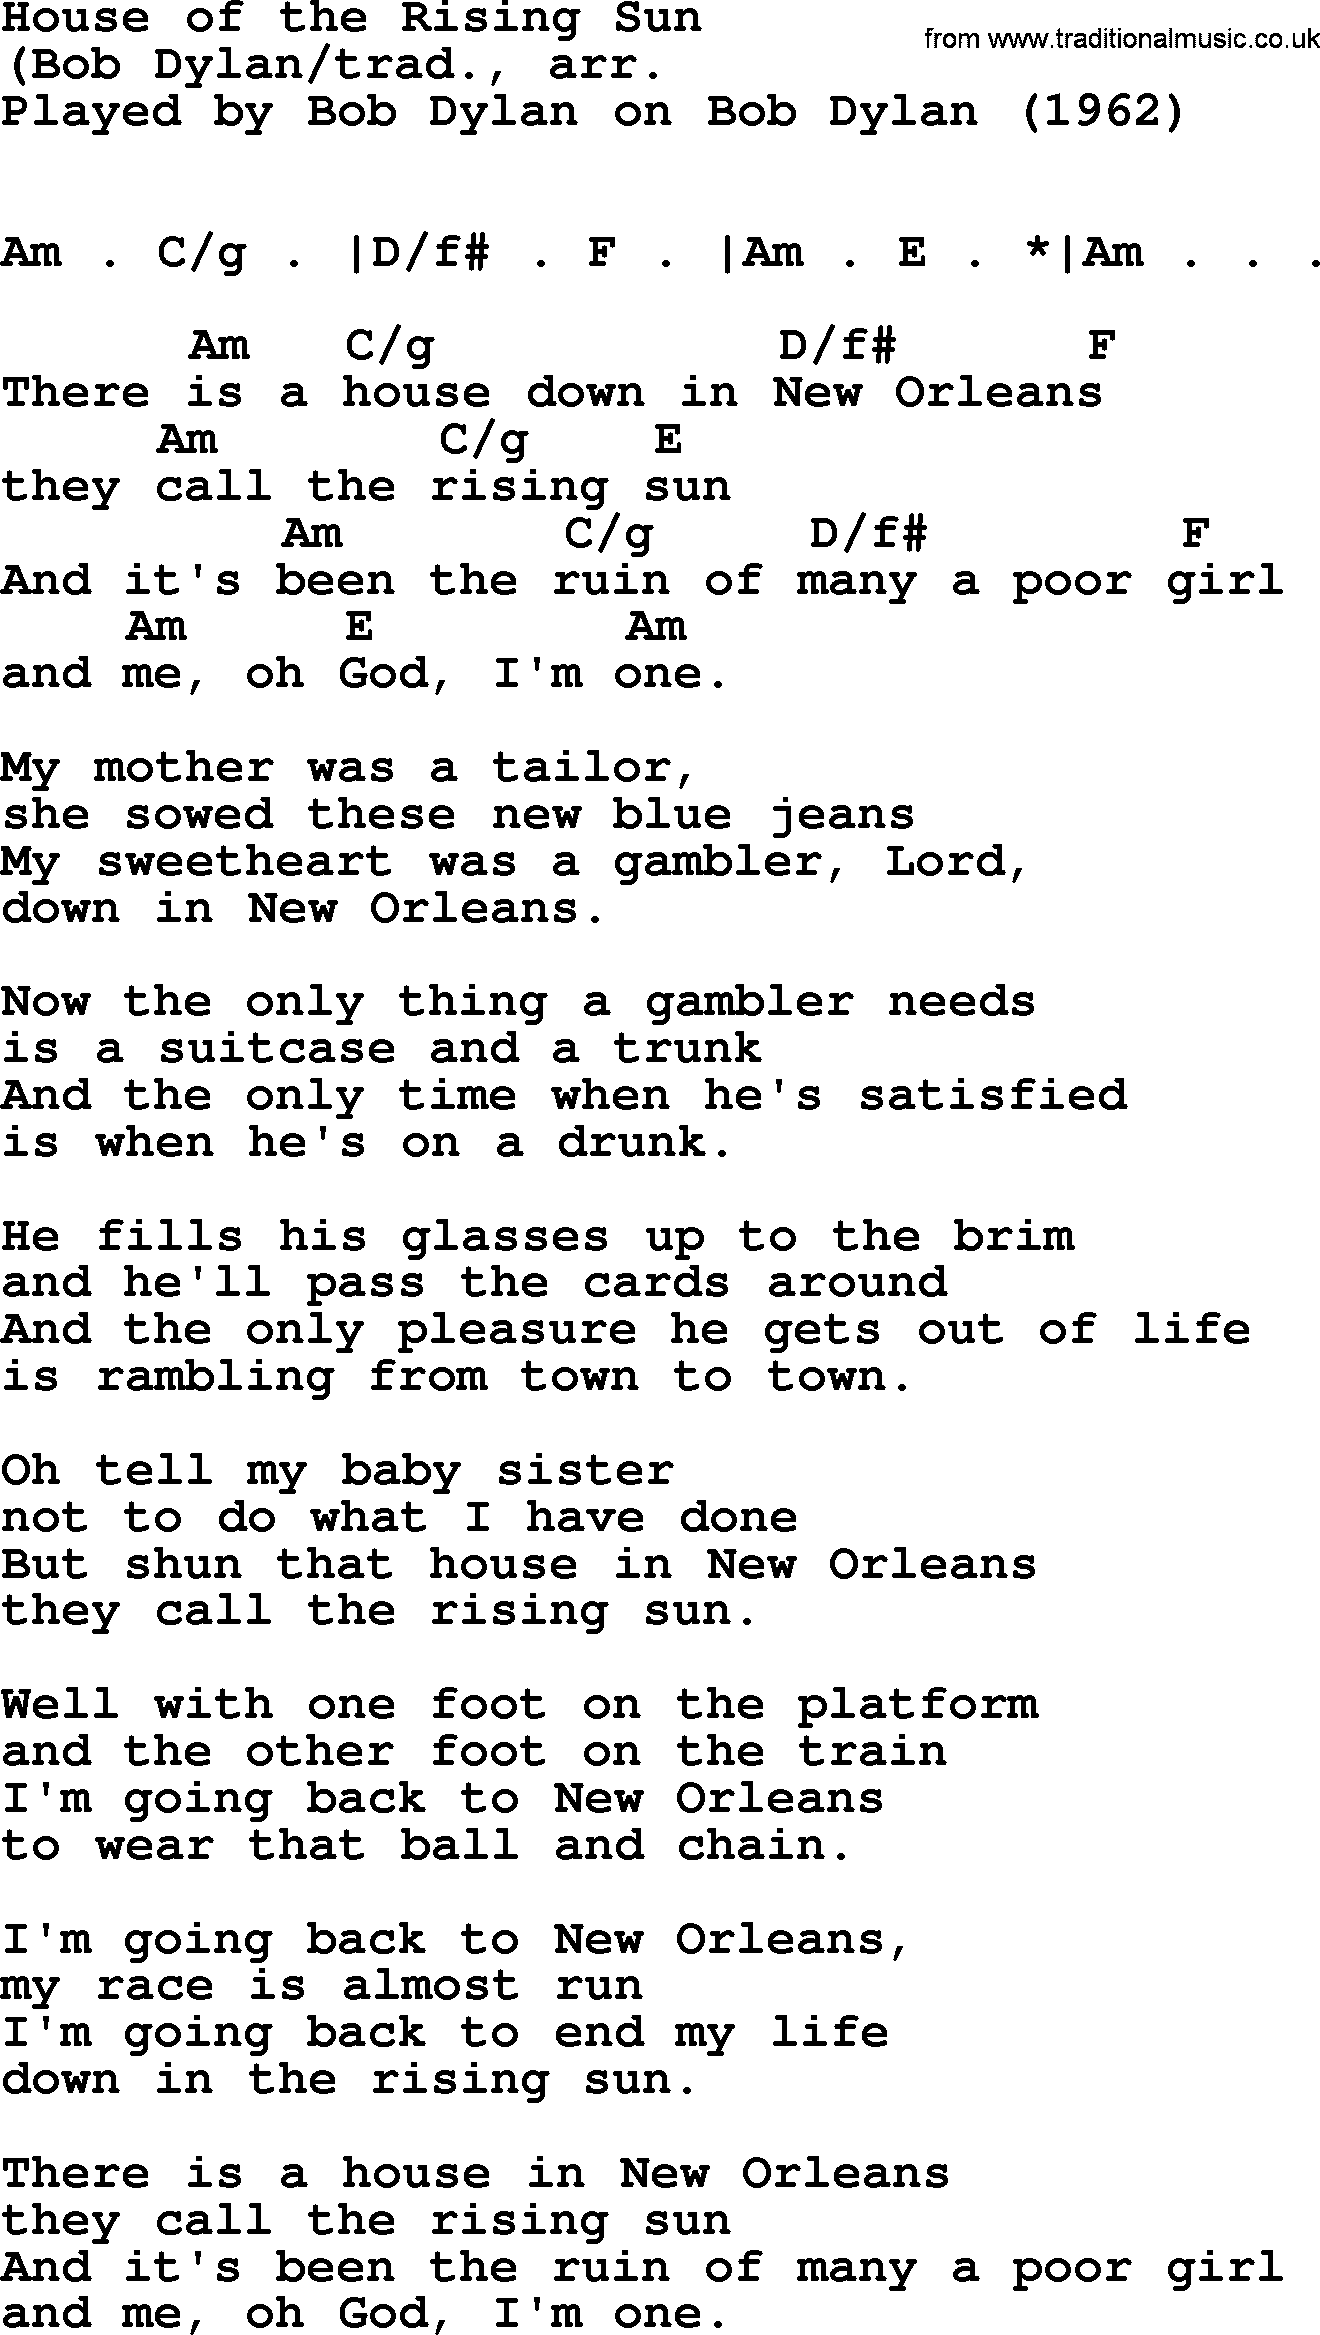 Bob Dylan song, lyrics with chords - House of the Rising Sun